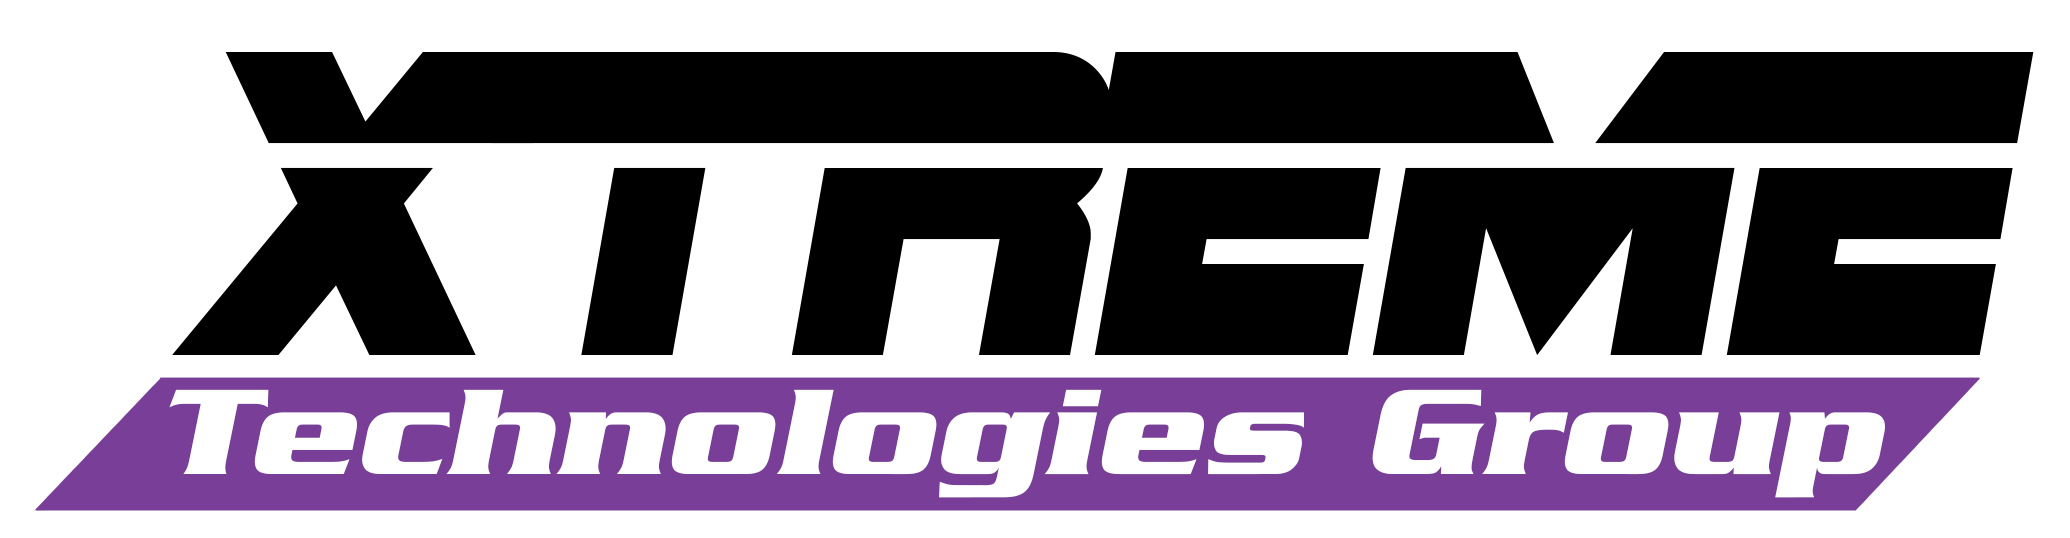  Xtreme Technologies and the Yaffa Family